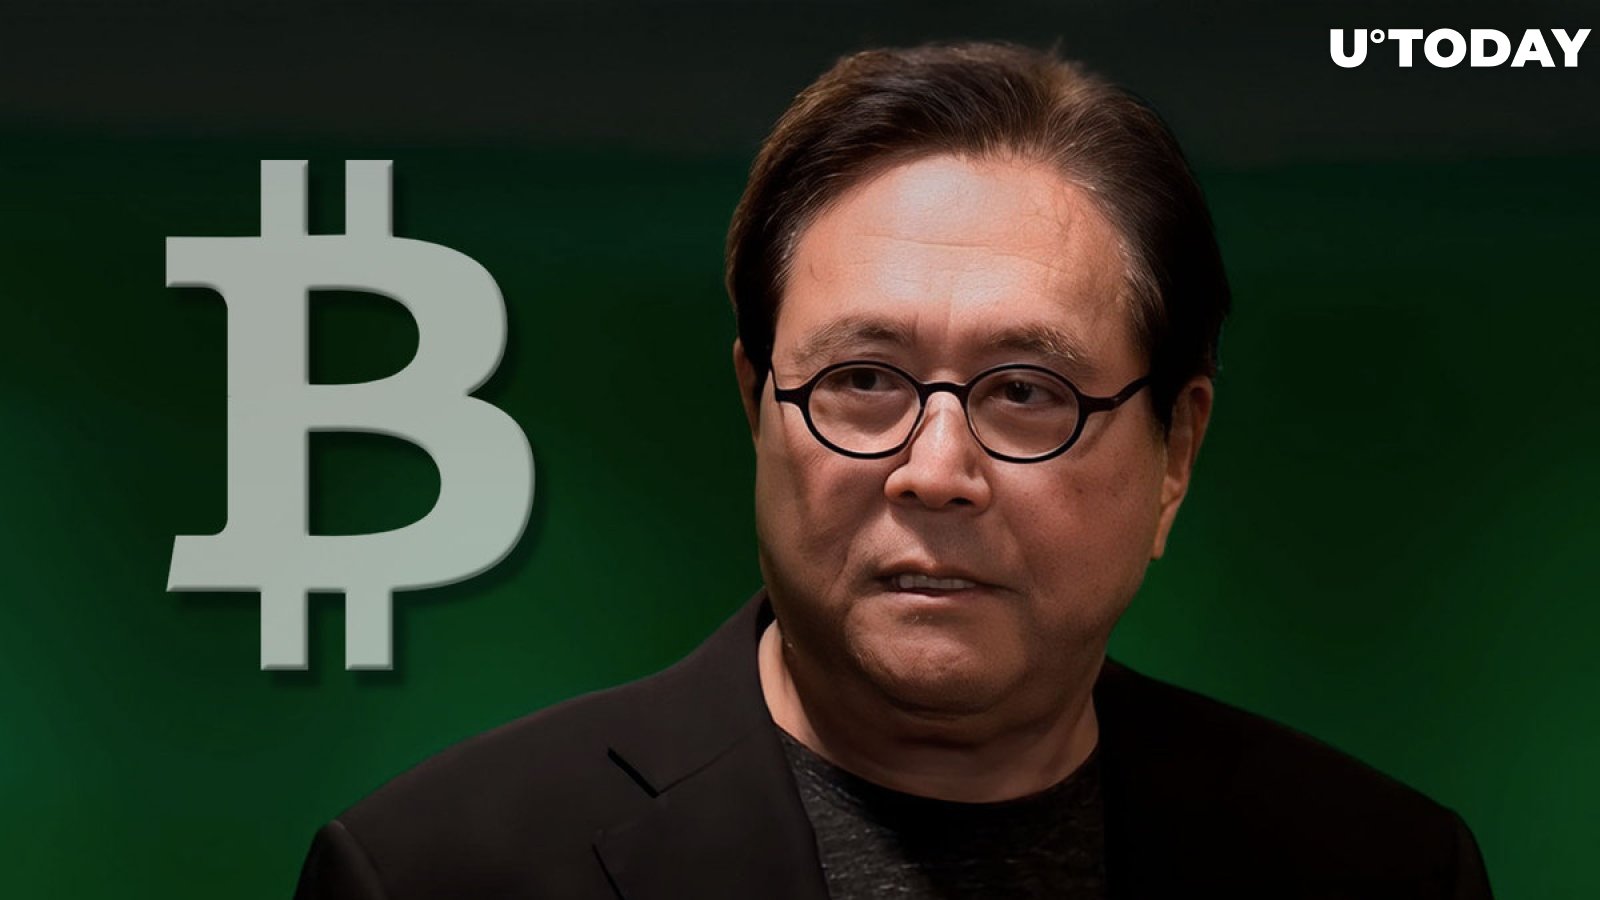 New Crucial Reasons for Bitcoin Purchasing Named by Legendary "Rich Dad, Poor Dad" Author